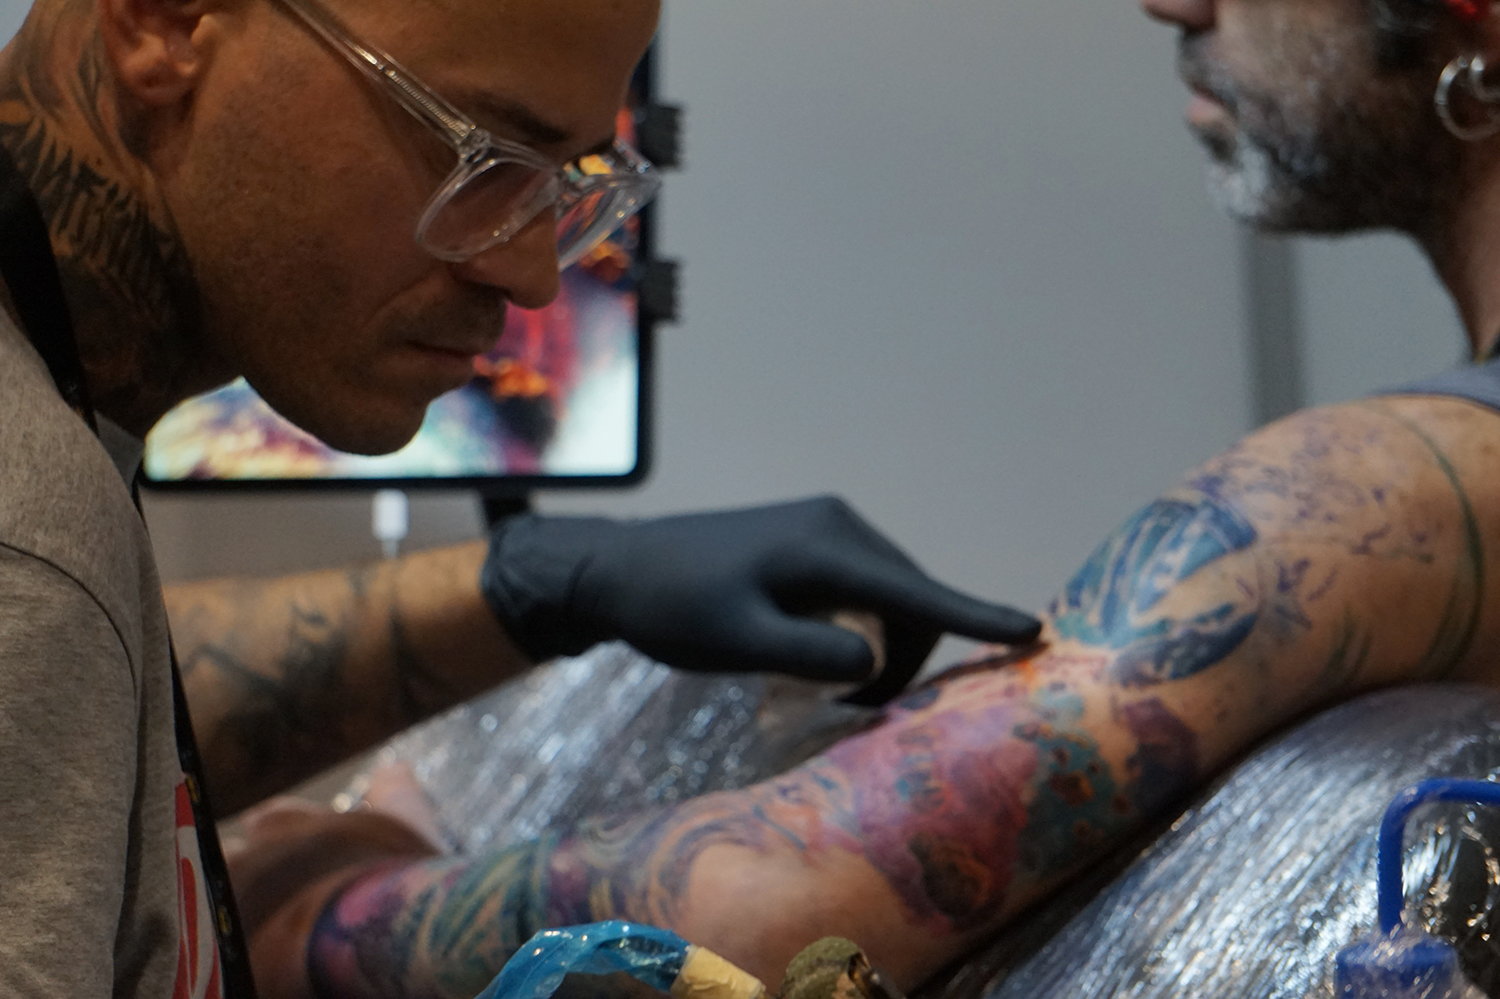 Mauro Amaral inking cosmic details on his client’s shoulder.